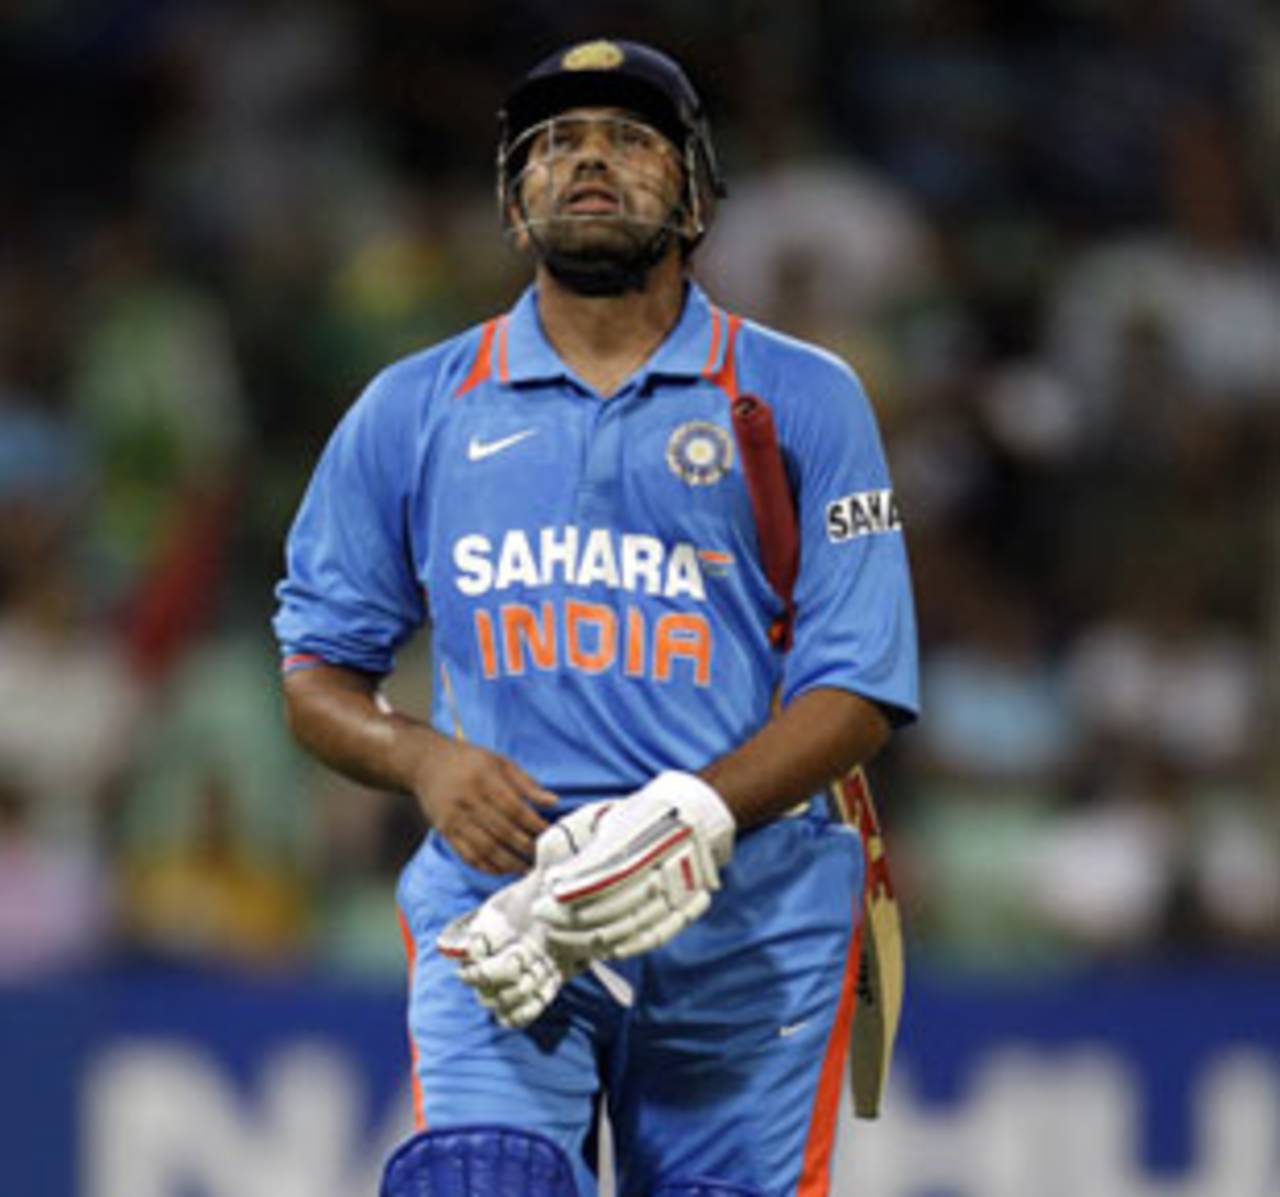 Rohit Sharma trudges off after making 11, South Africa v India, 1st ODI, Durban, January 12, 2011